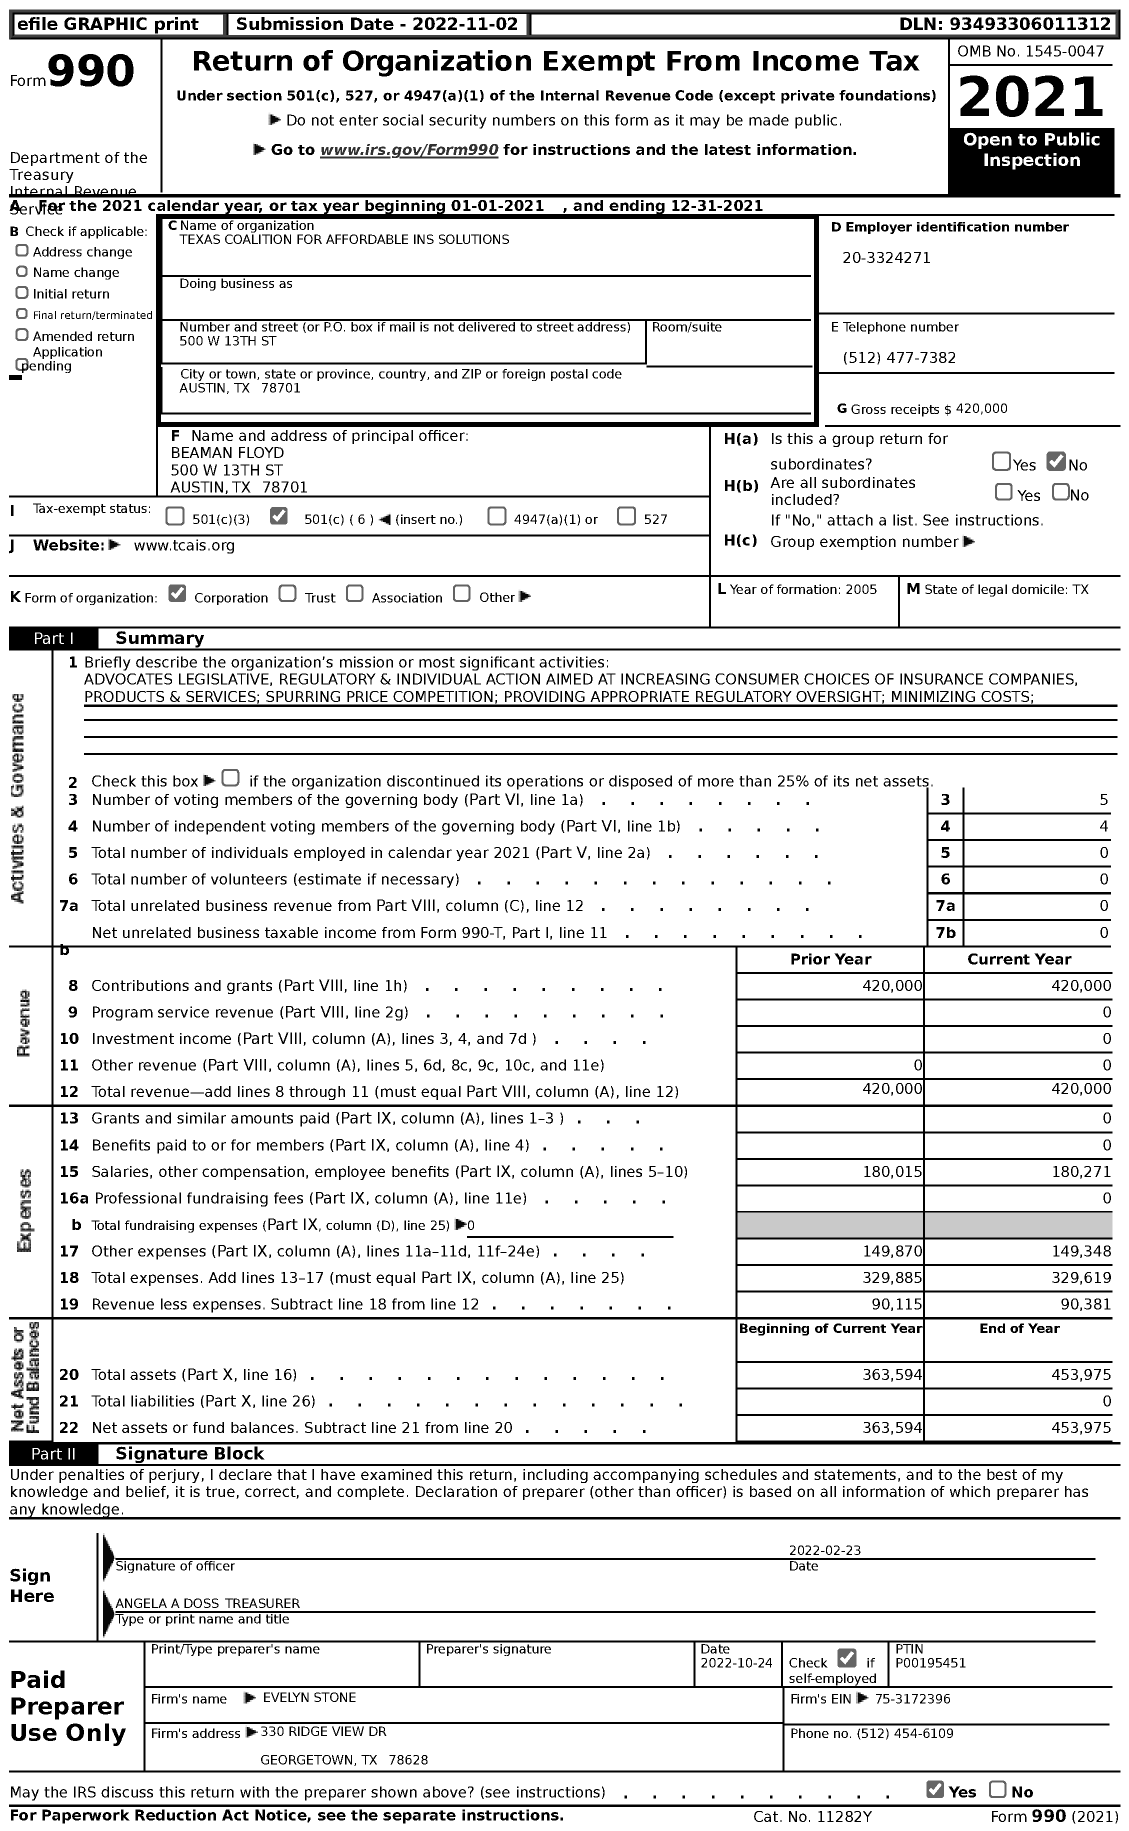 Image of first page of 2021 Form 990 for Texas Coalition for Affordable Ins Solutions